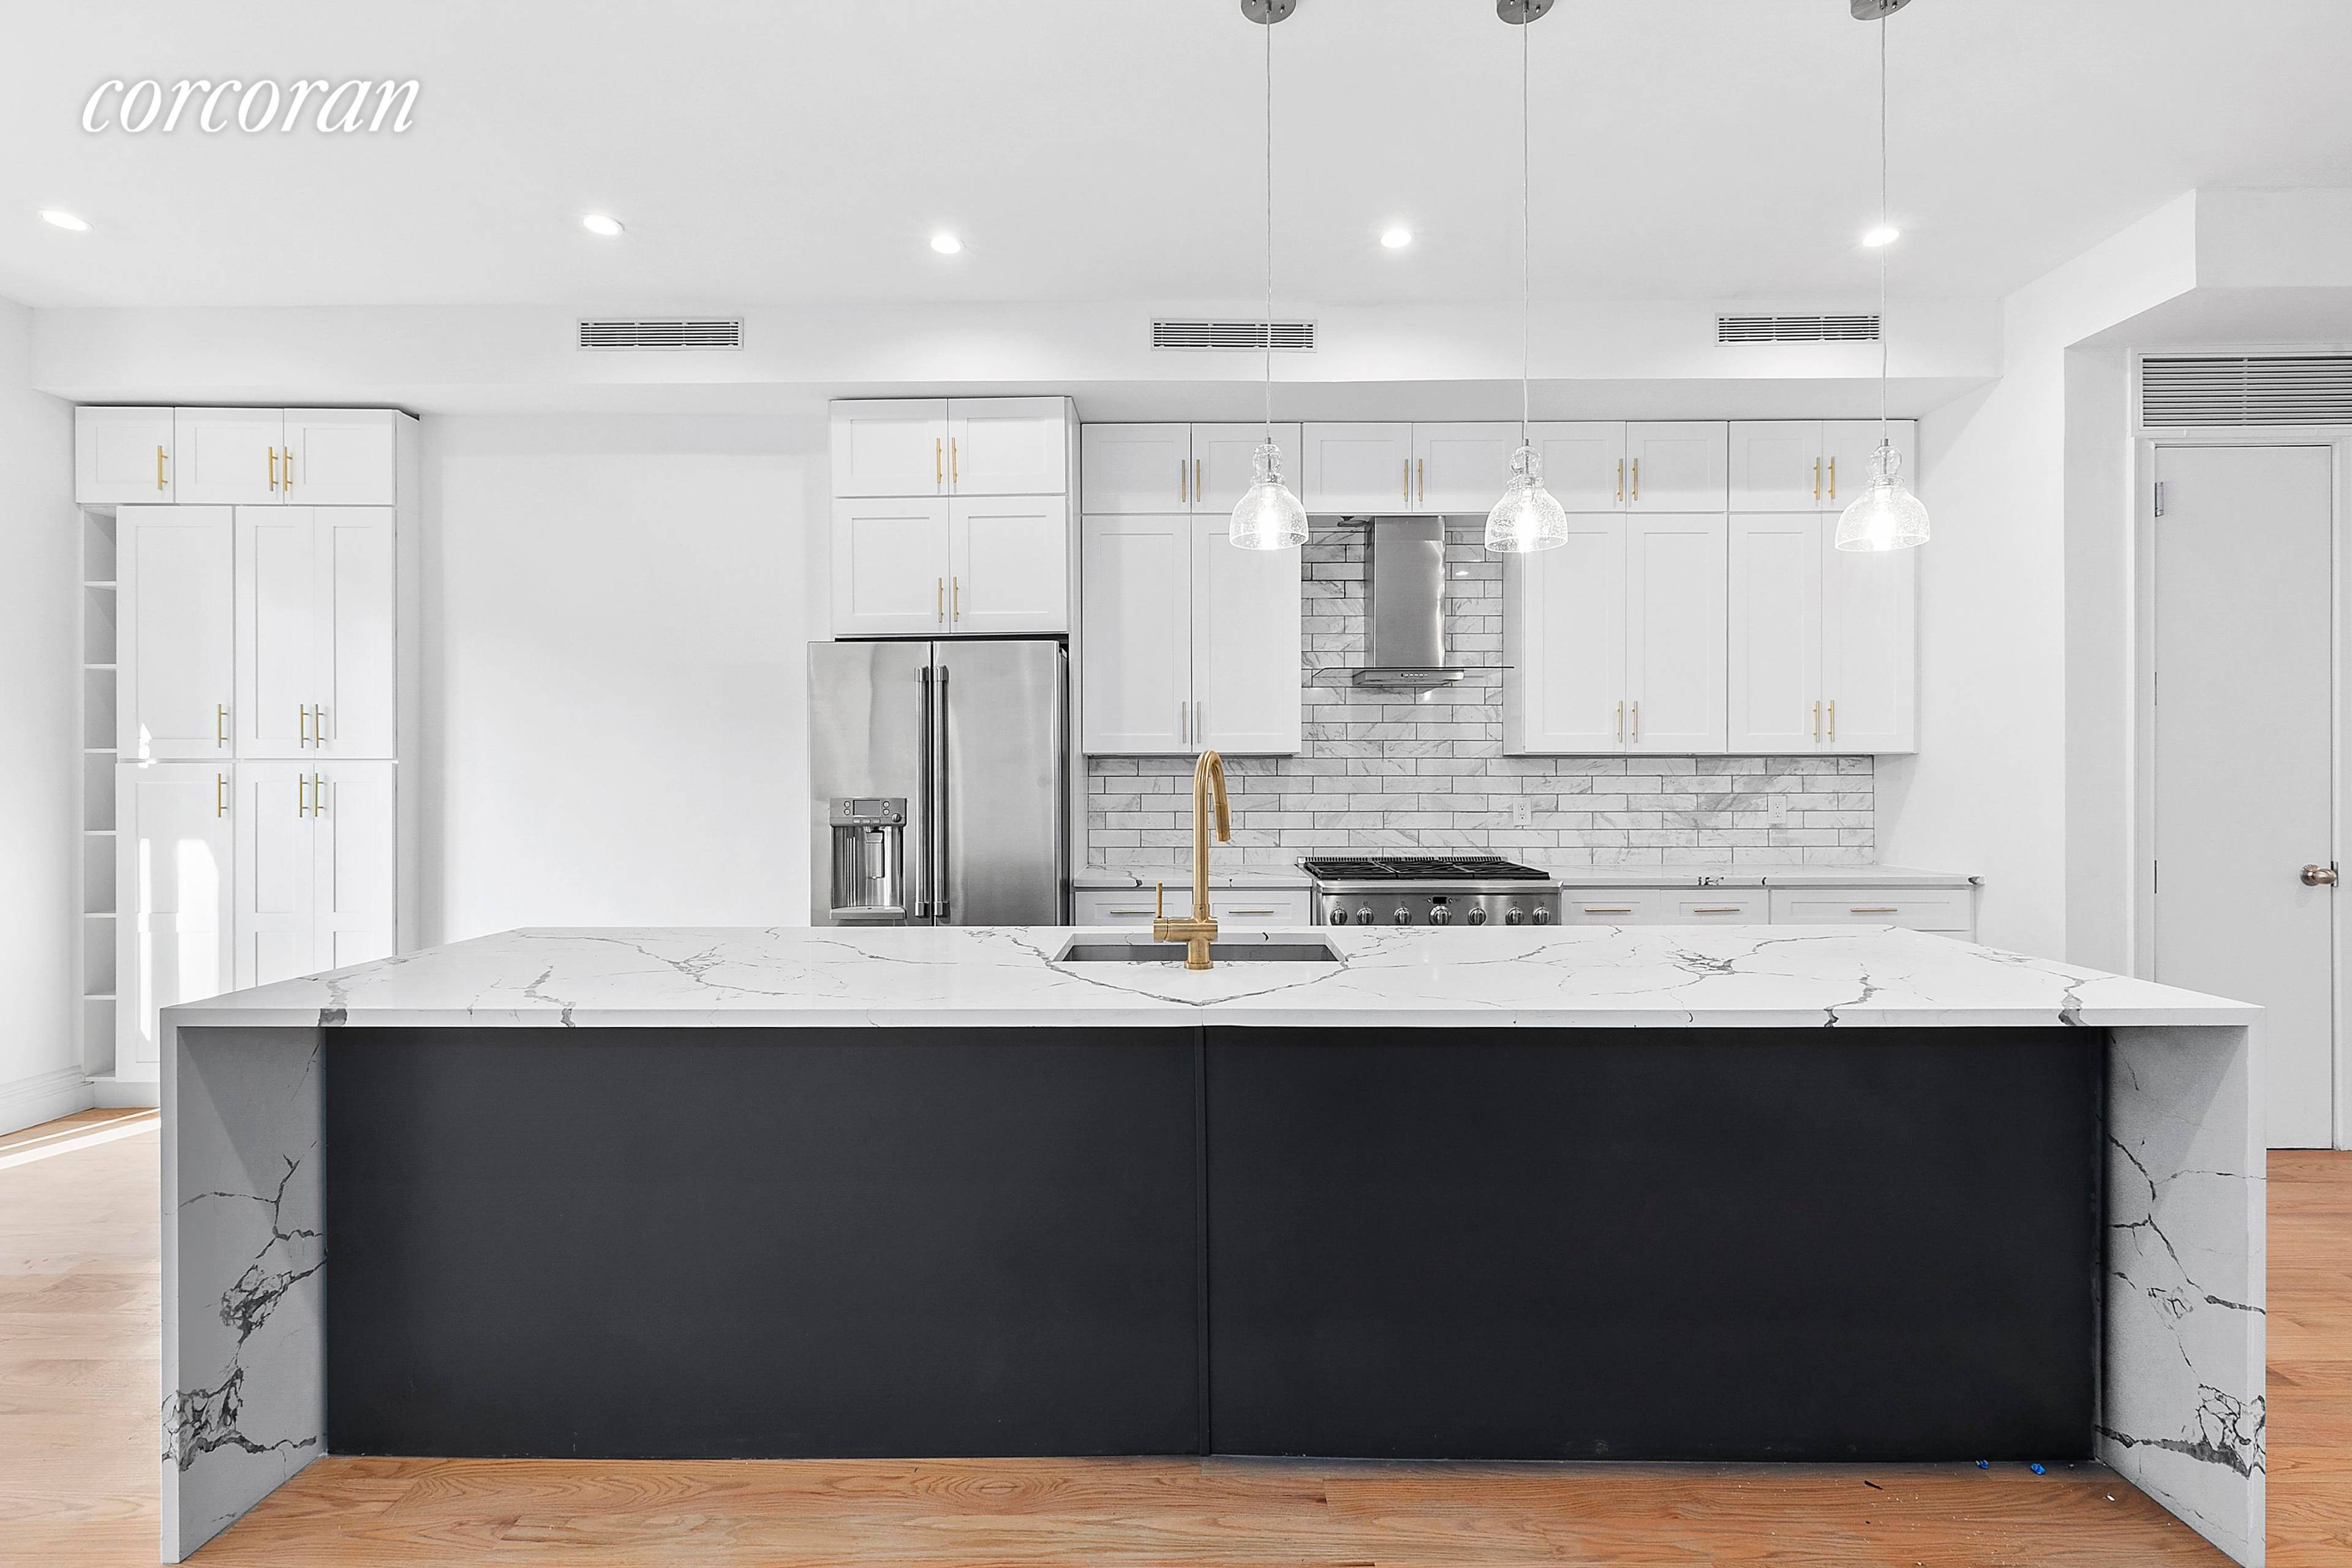 Welcome to 1055 Hancock Street, a beautifully renovated, 3000 sq ft, two family townhouse, situated in the heart of burgeoning Bushwick !